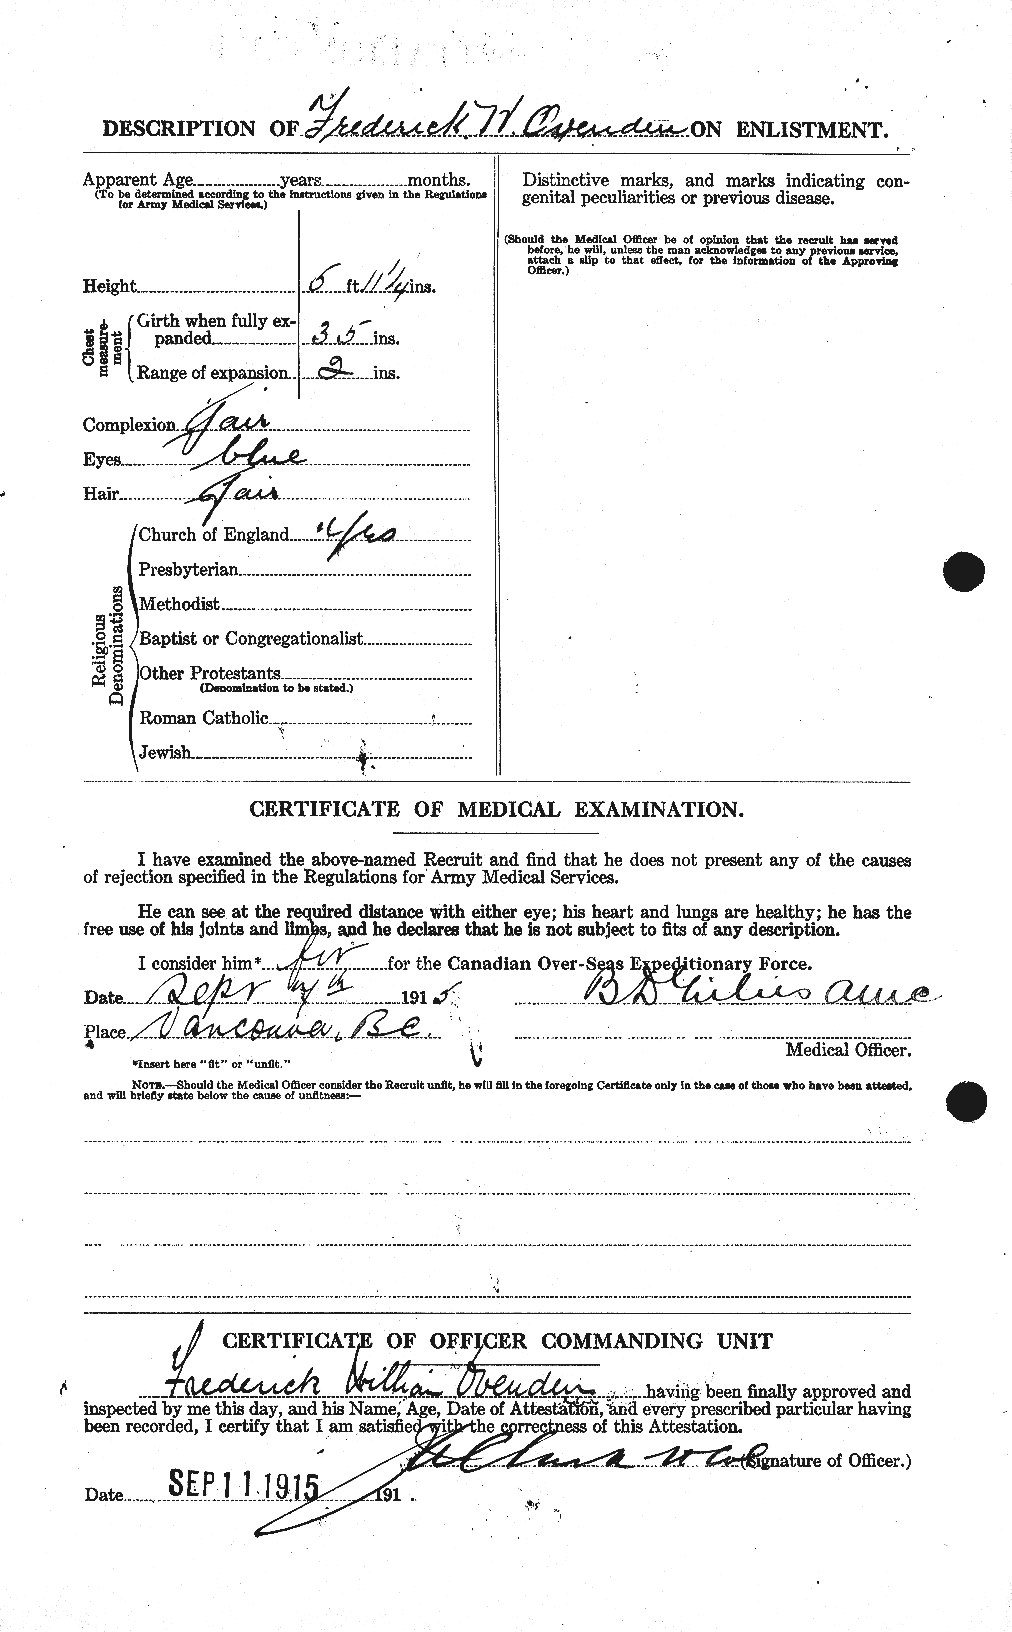 Personnel Records of the First World War - CEF 561039b